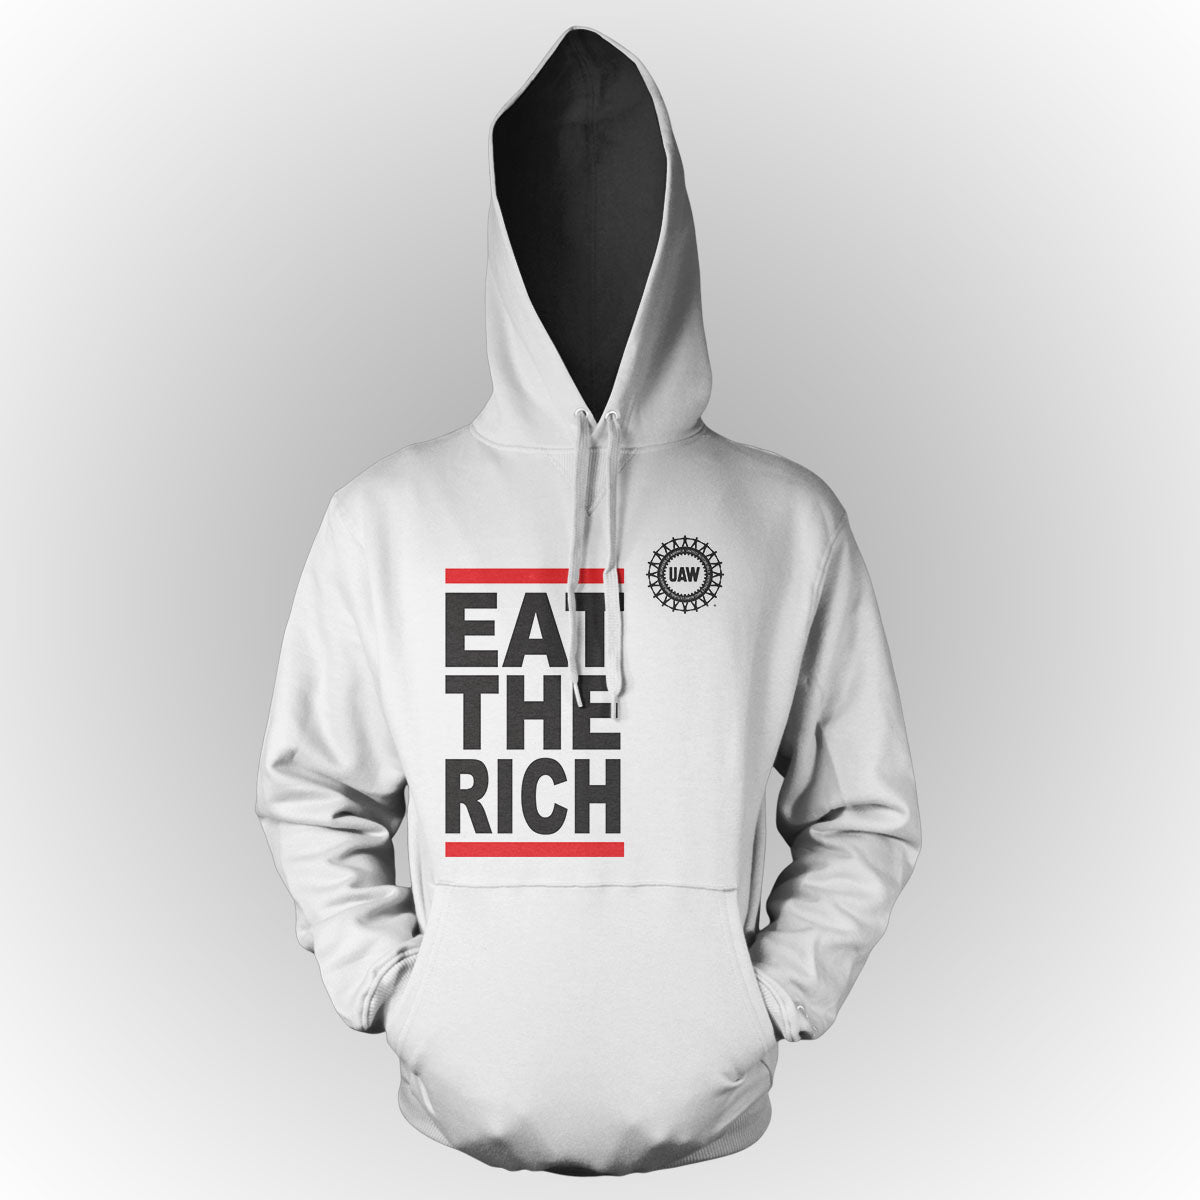 UAW Eat The Rich Apparel